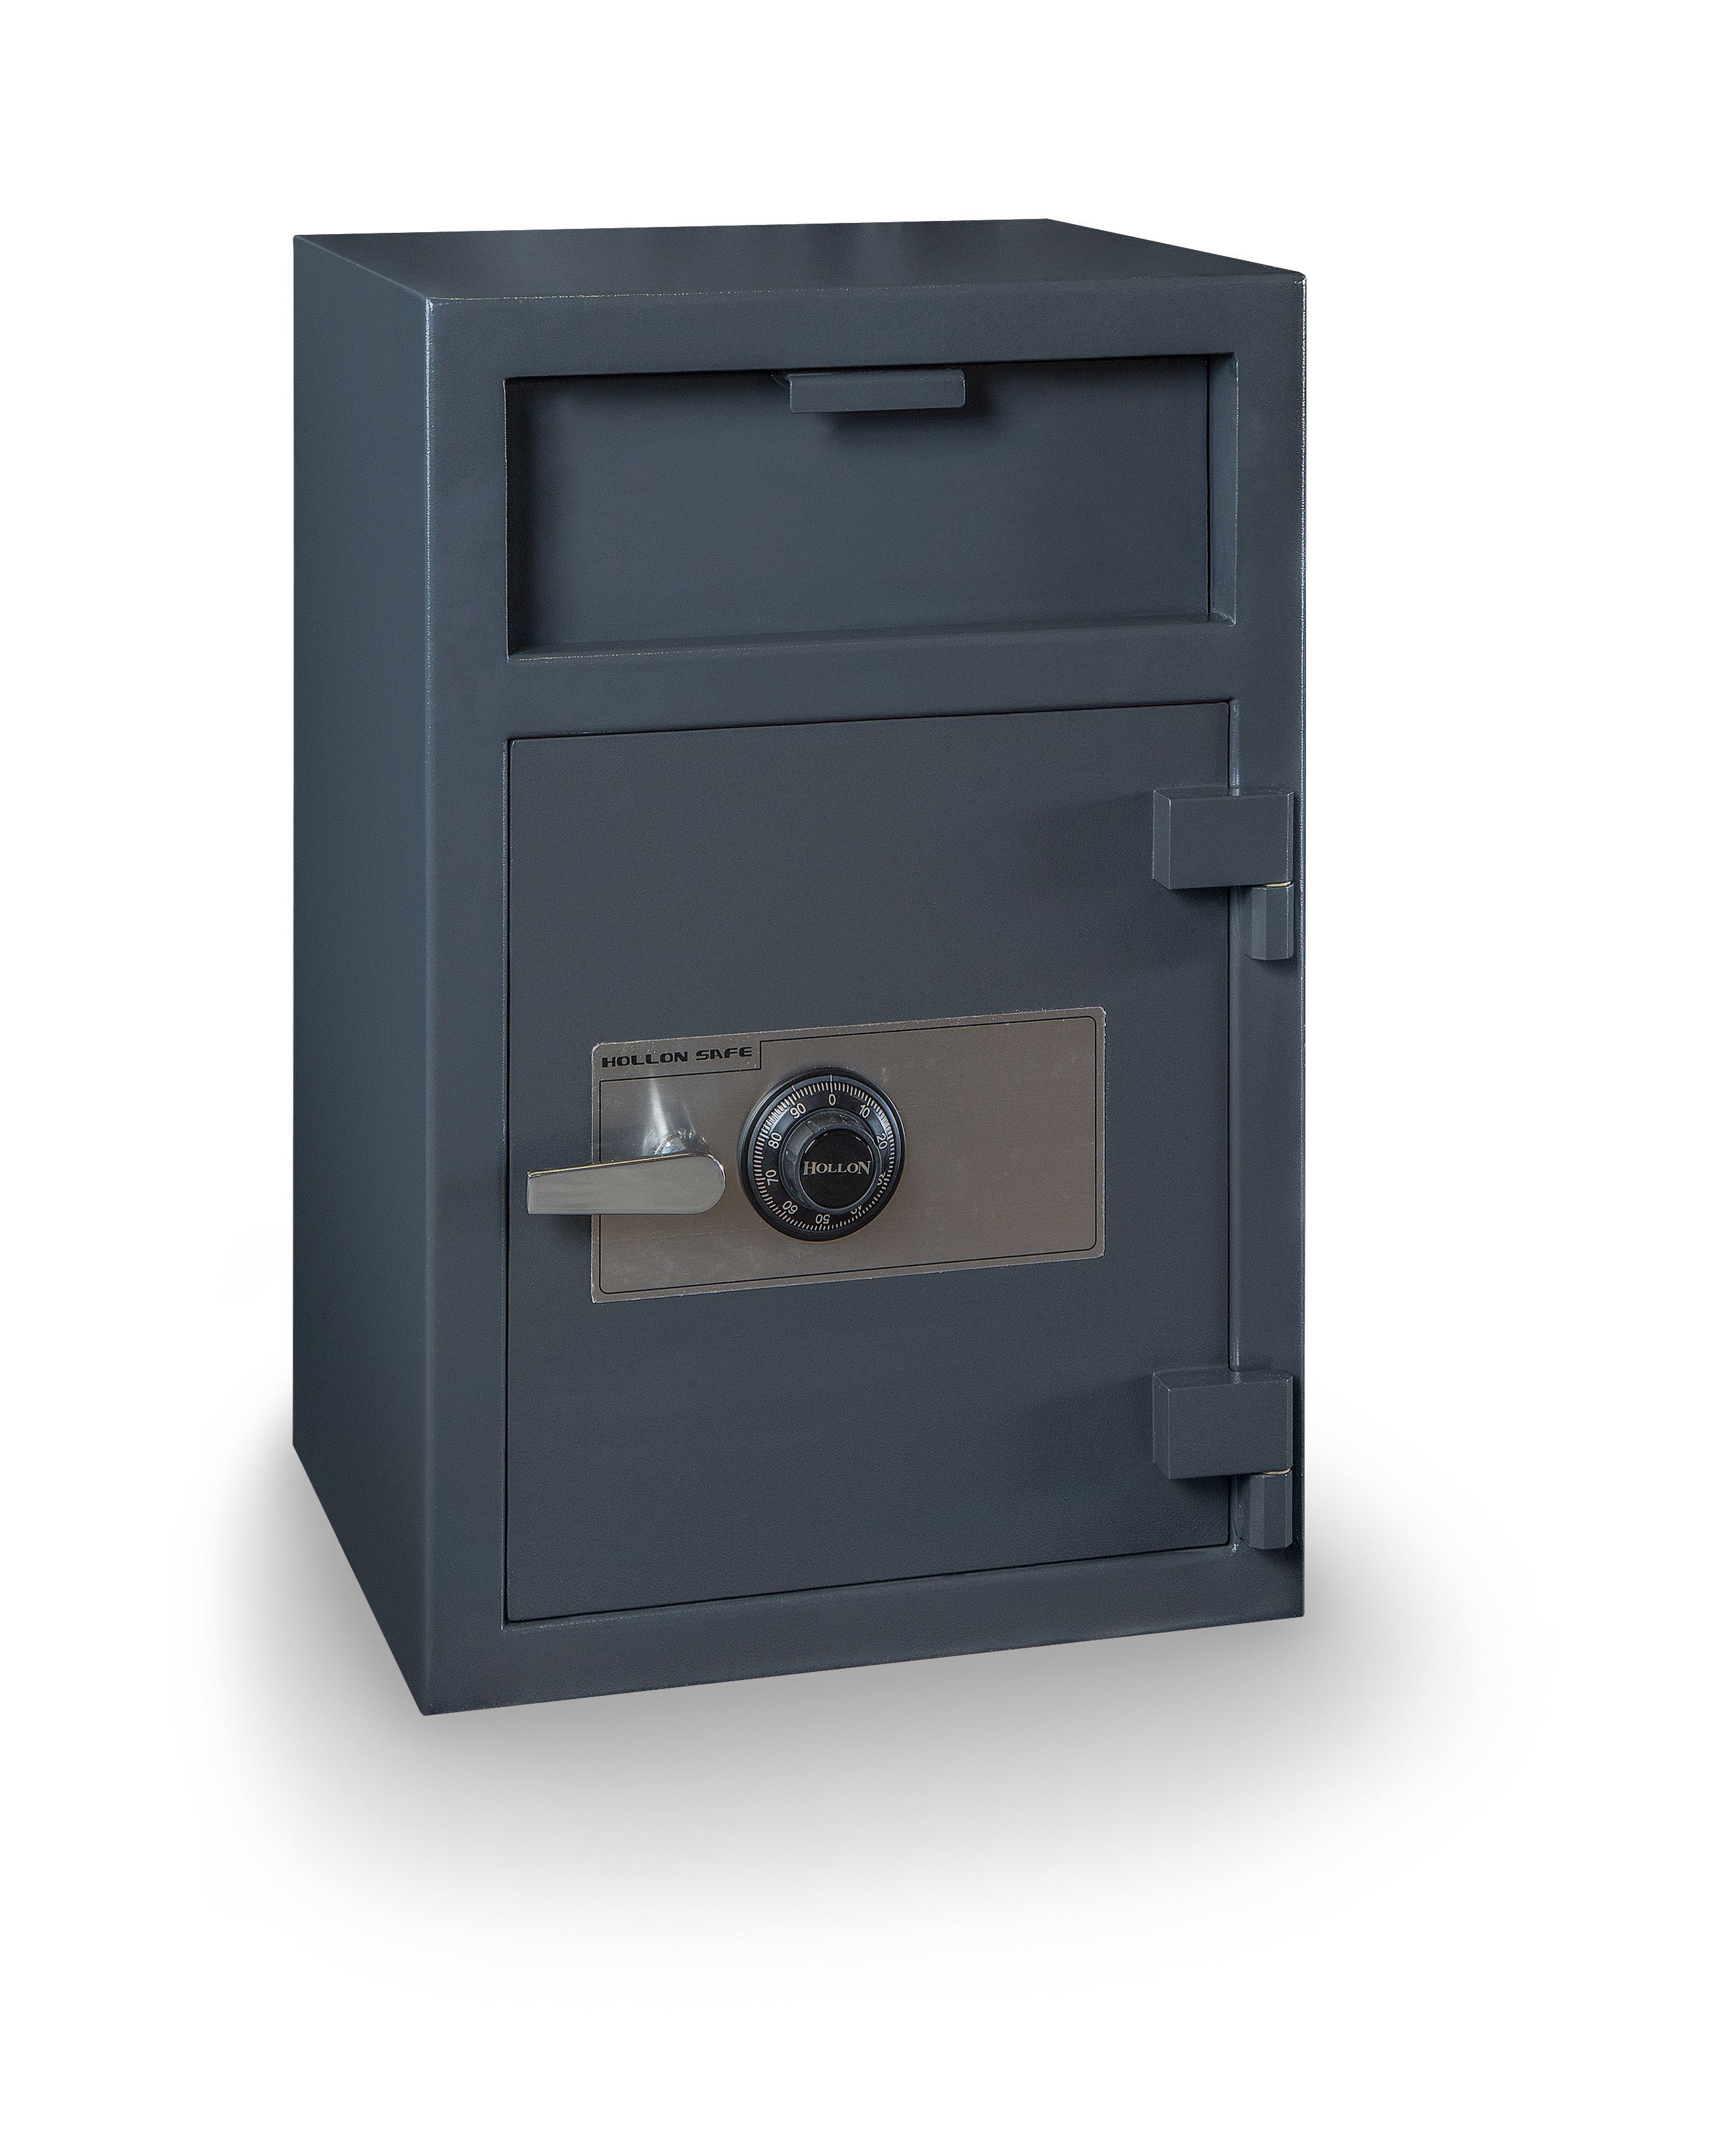 Security Safes - Depository Safe With Inner Locking Department - FD-3020CILK